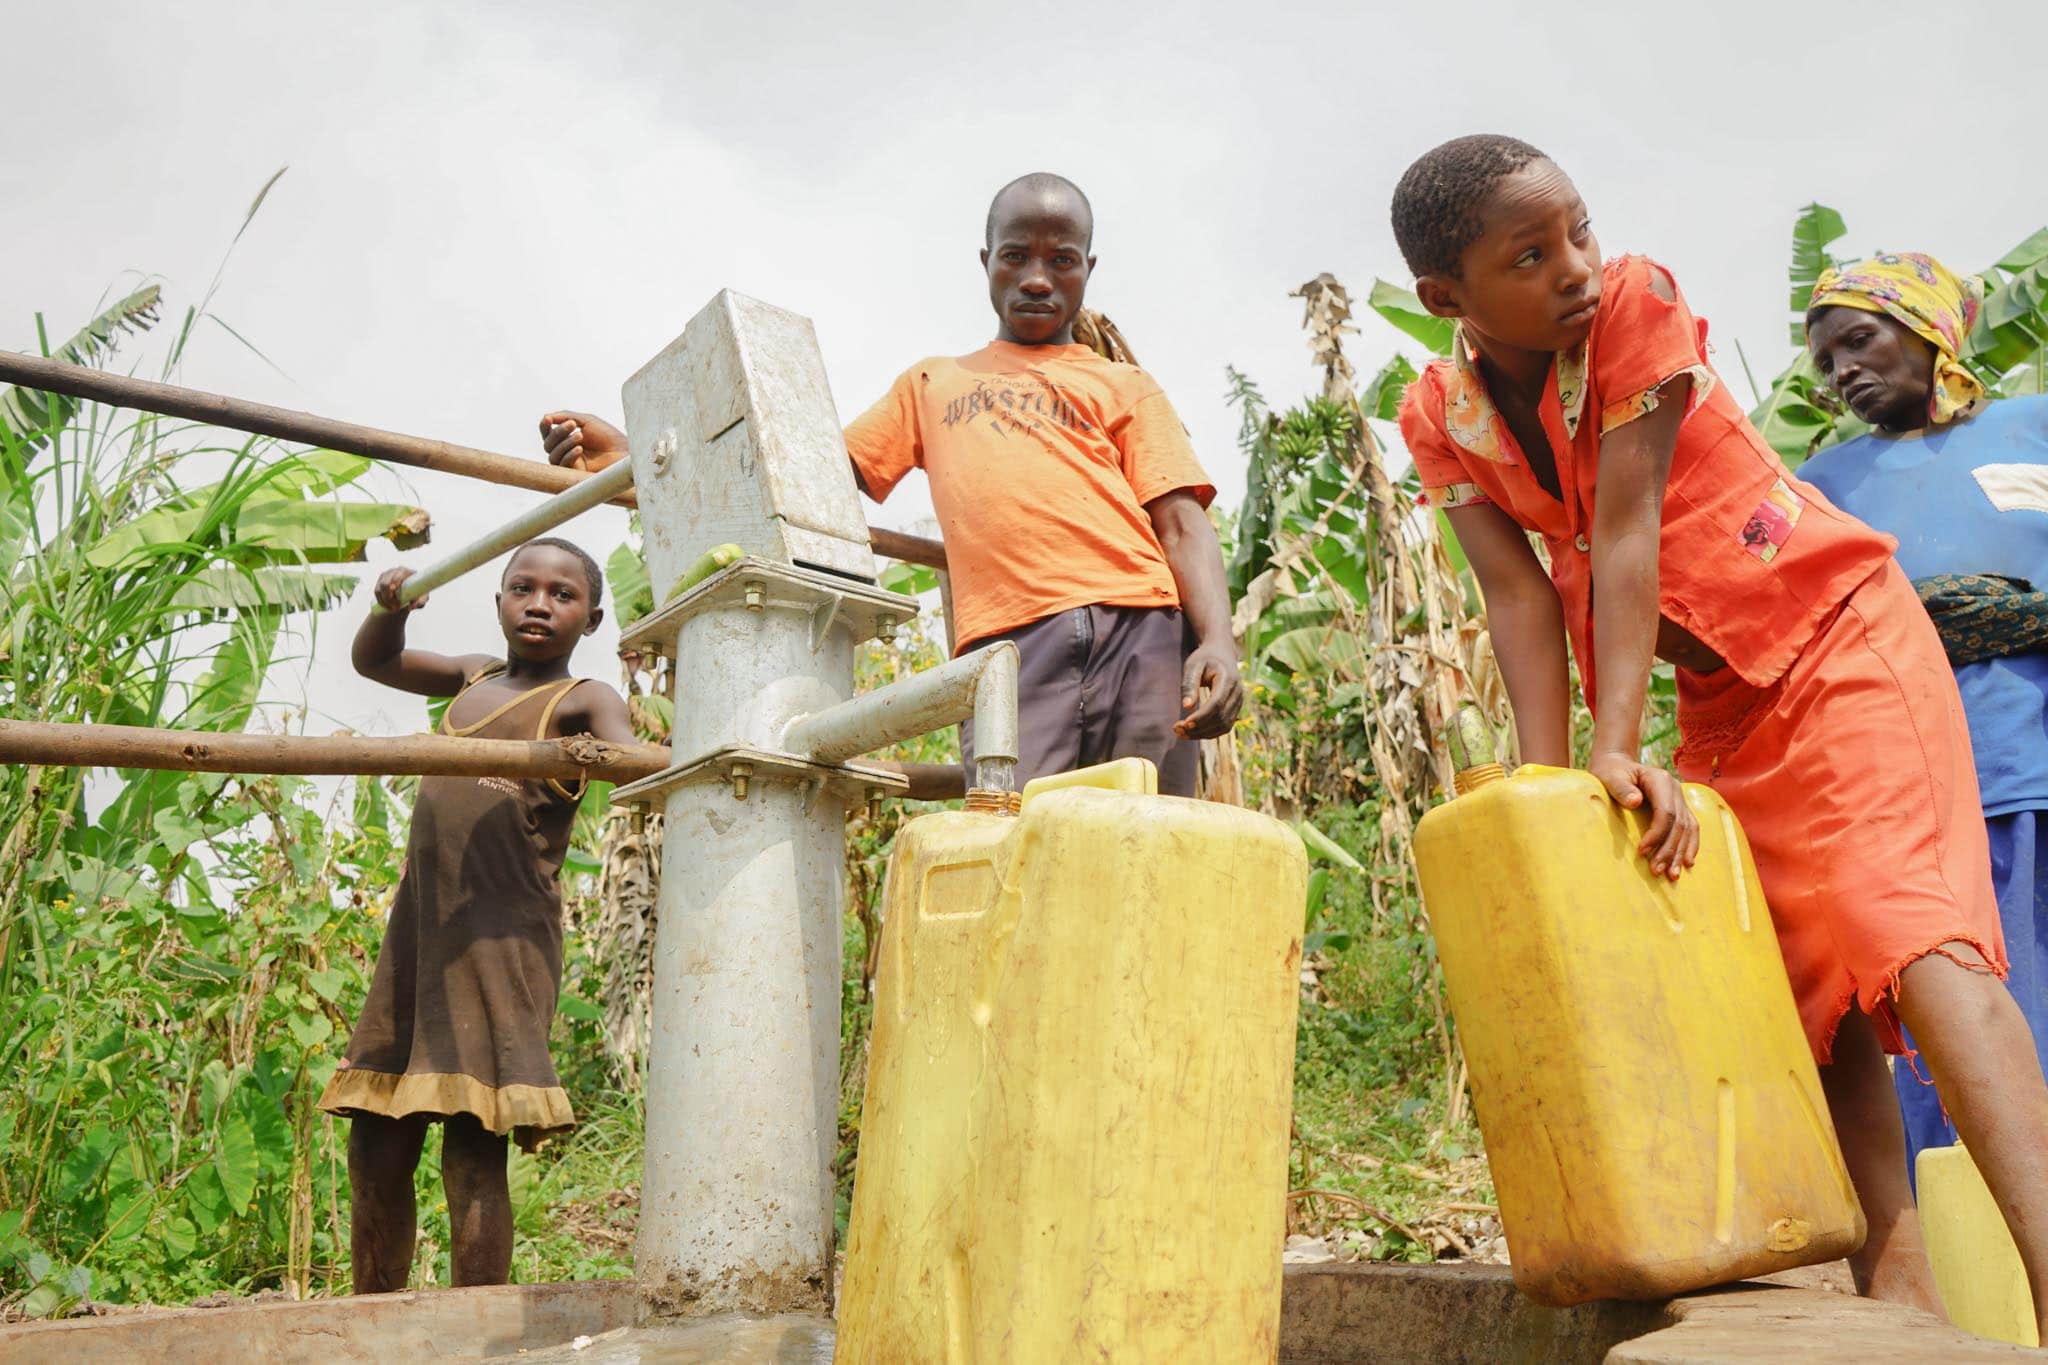 Rukiri B Village members fetching water from the newly constructed well as part of Raising The Village programs.